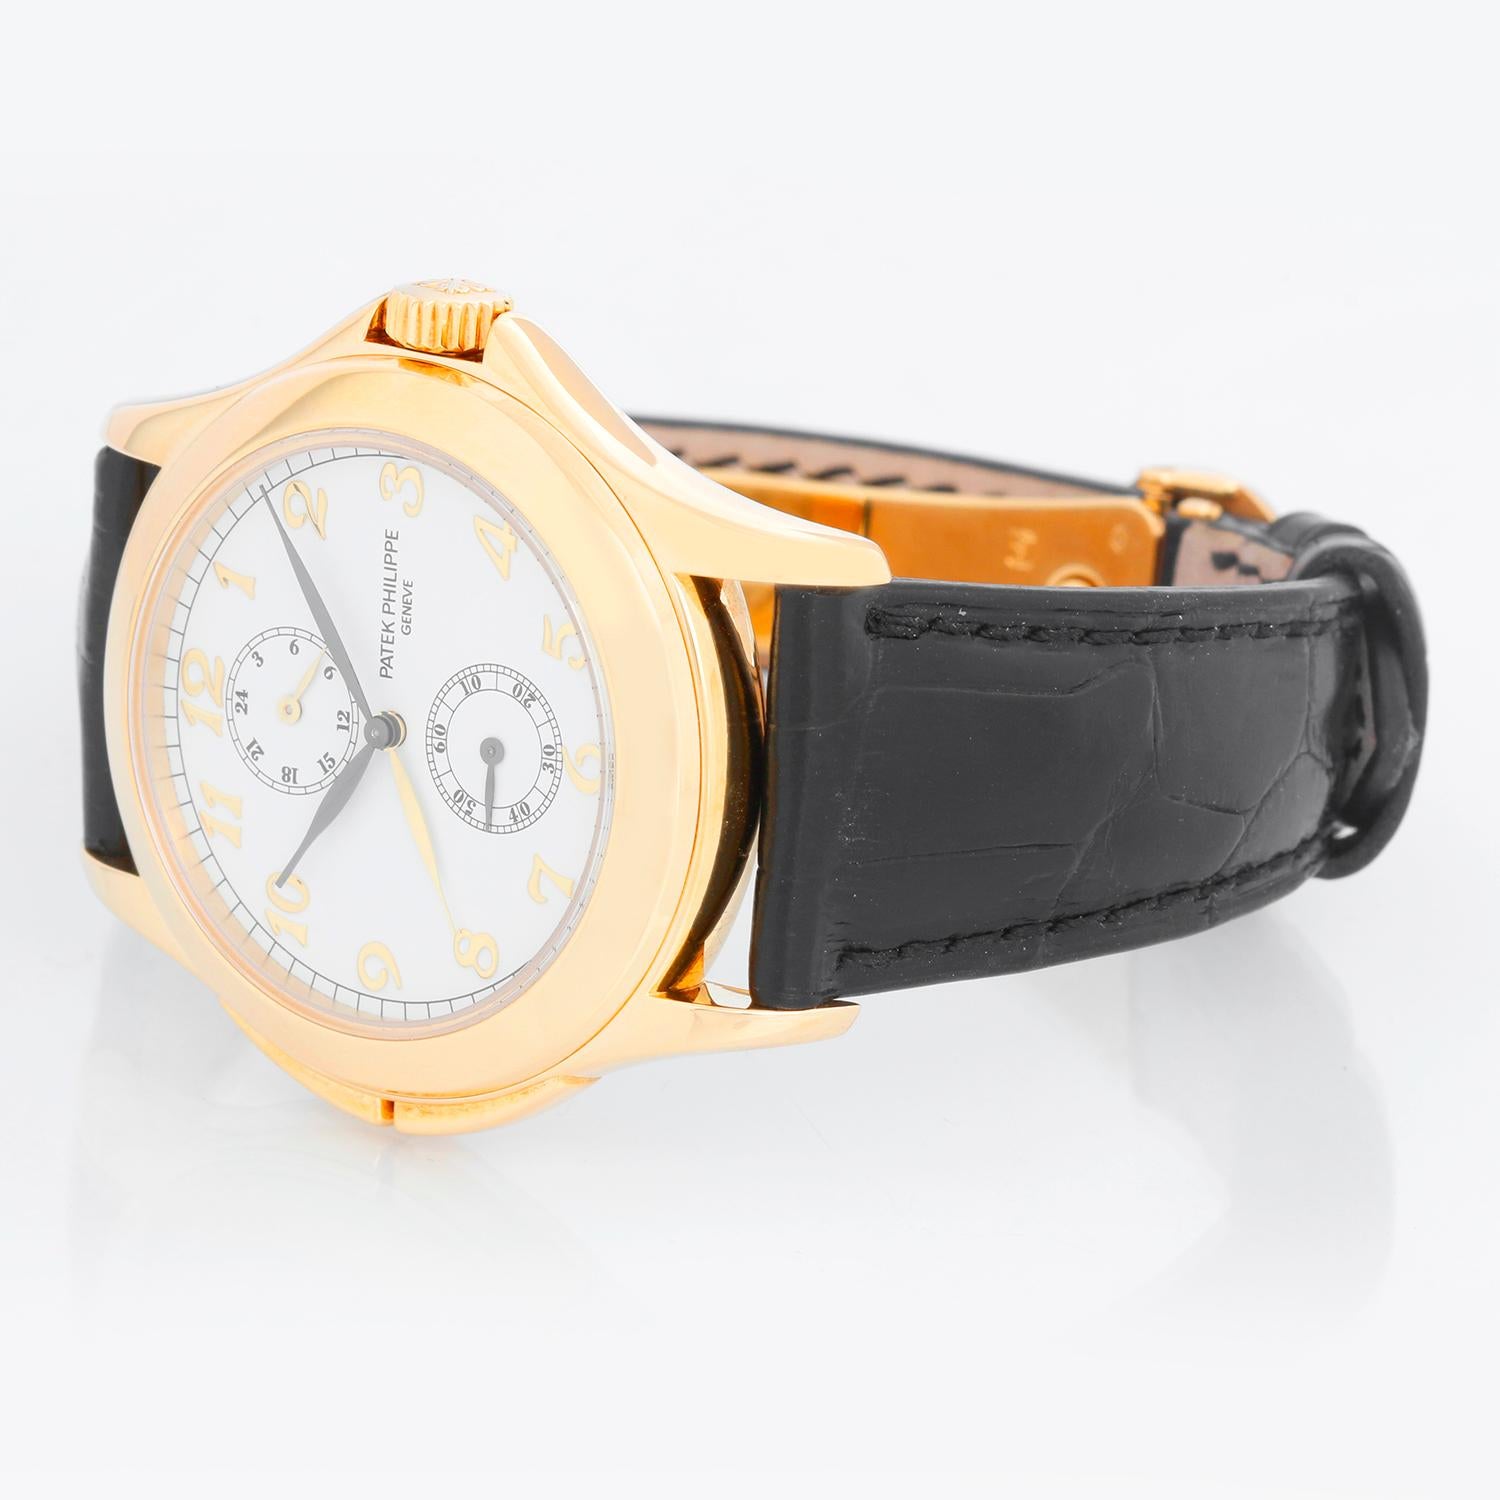 Collectible Patek Philippe Travel Time Men's 18k Yellow Gold Watch 5134-J or 5134J - Manual winding; dual time. 18k yellow gold case with exposition back (36mm diameter). White dial with yellow gold Breguet numerals. Patek Philippe strap band; 18k